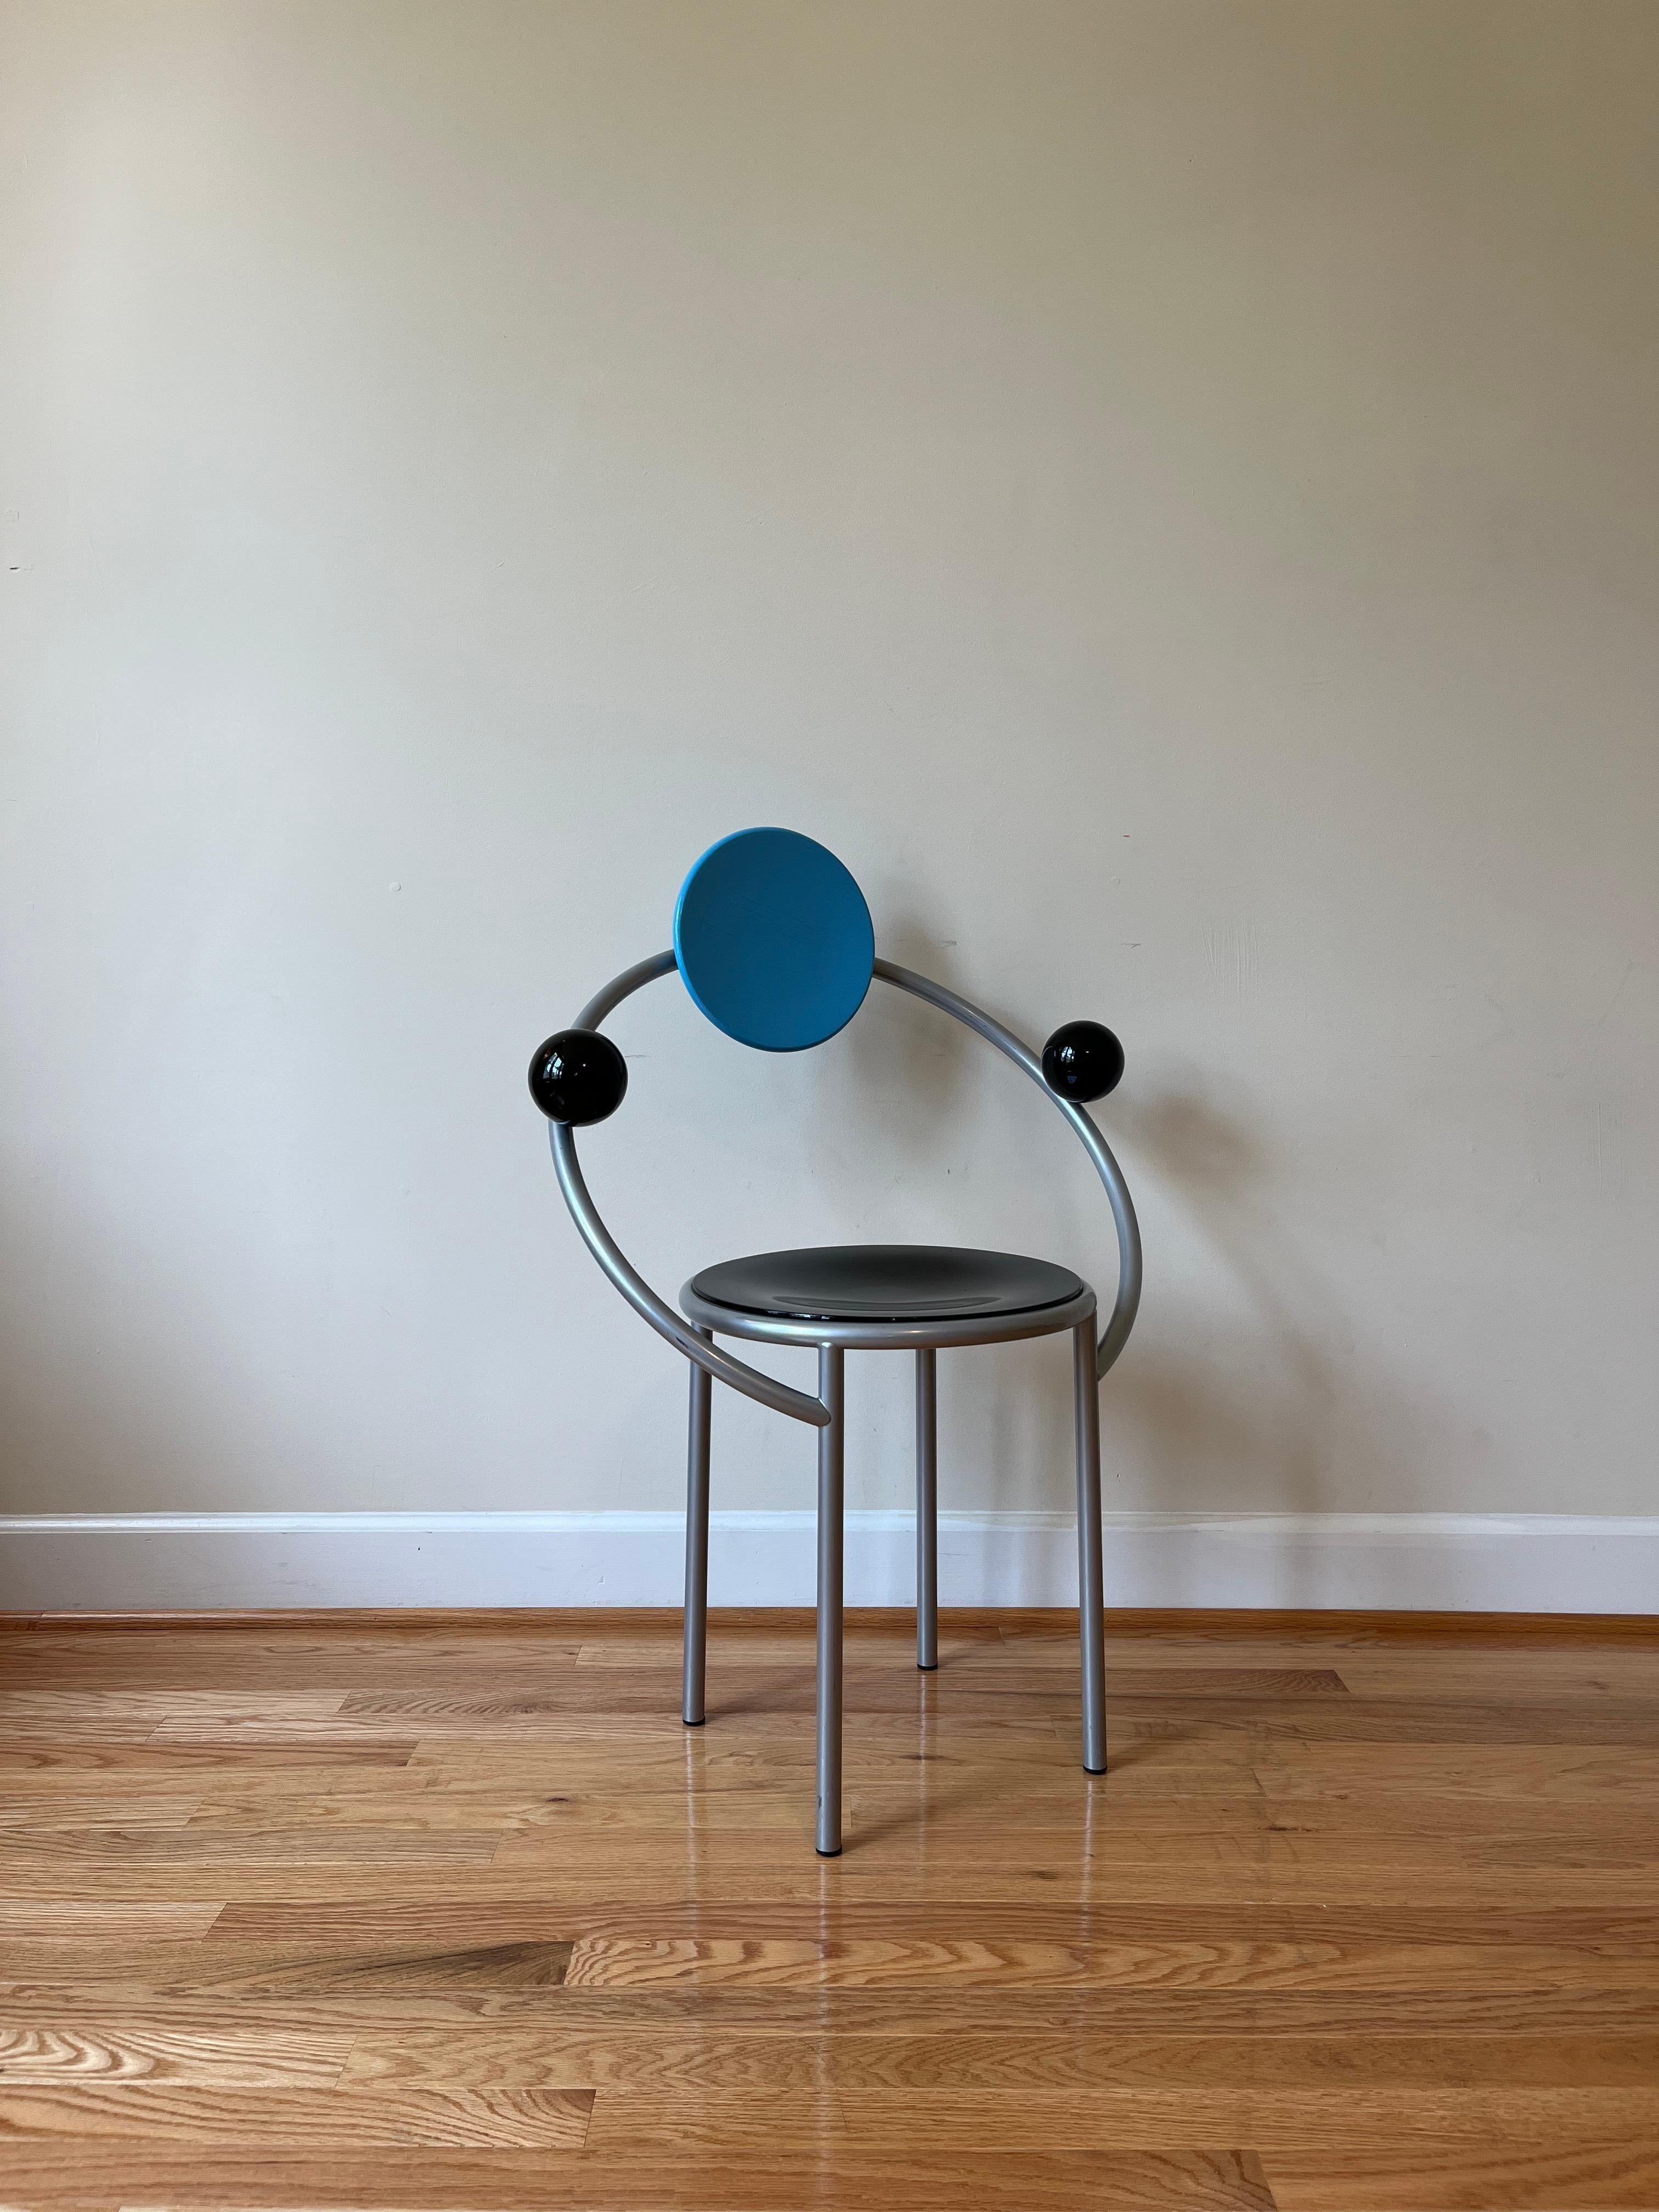 Michele de Lucchi was one of the cofounders of the Milano Design Group Memphis, which emerged at the end of 1980 around the central figure of Ettore Sottsass.

“First” by Michele de Lucchi was one of the few designs intended for the broad public